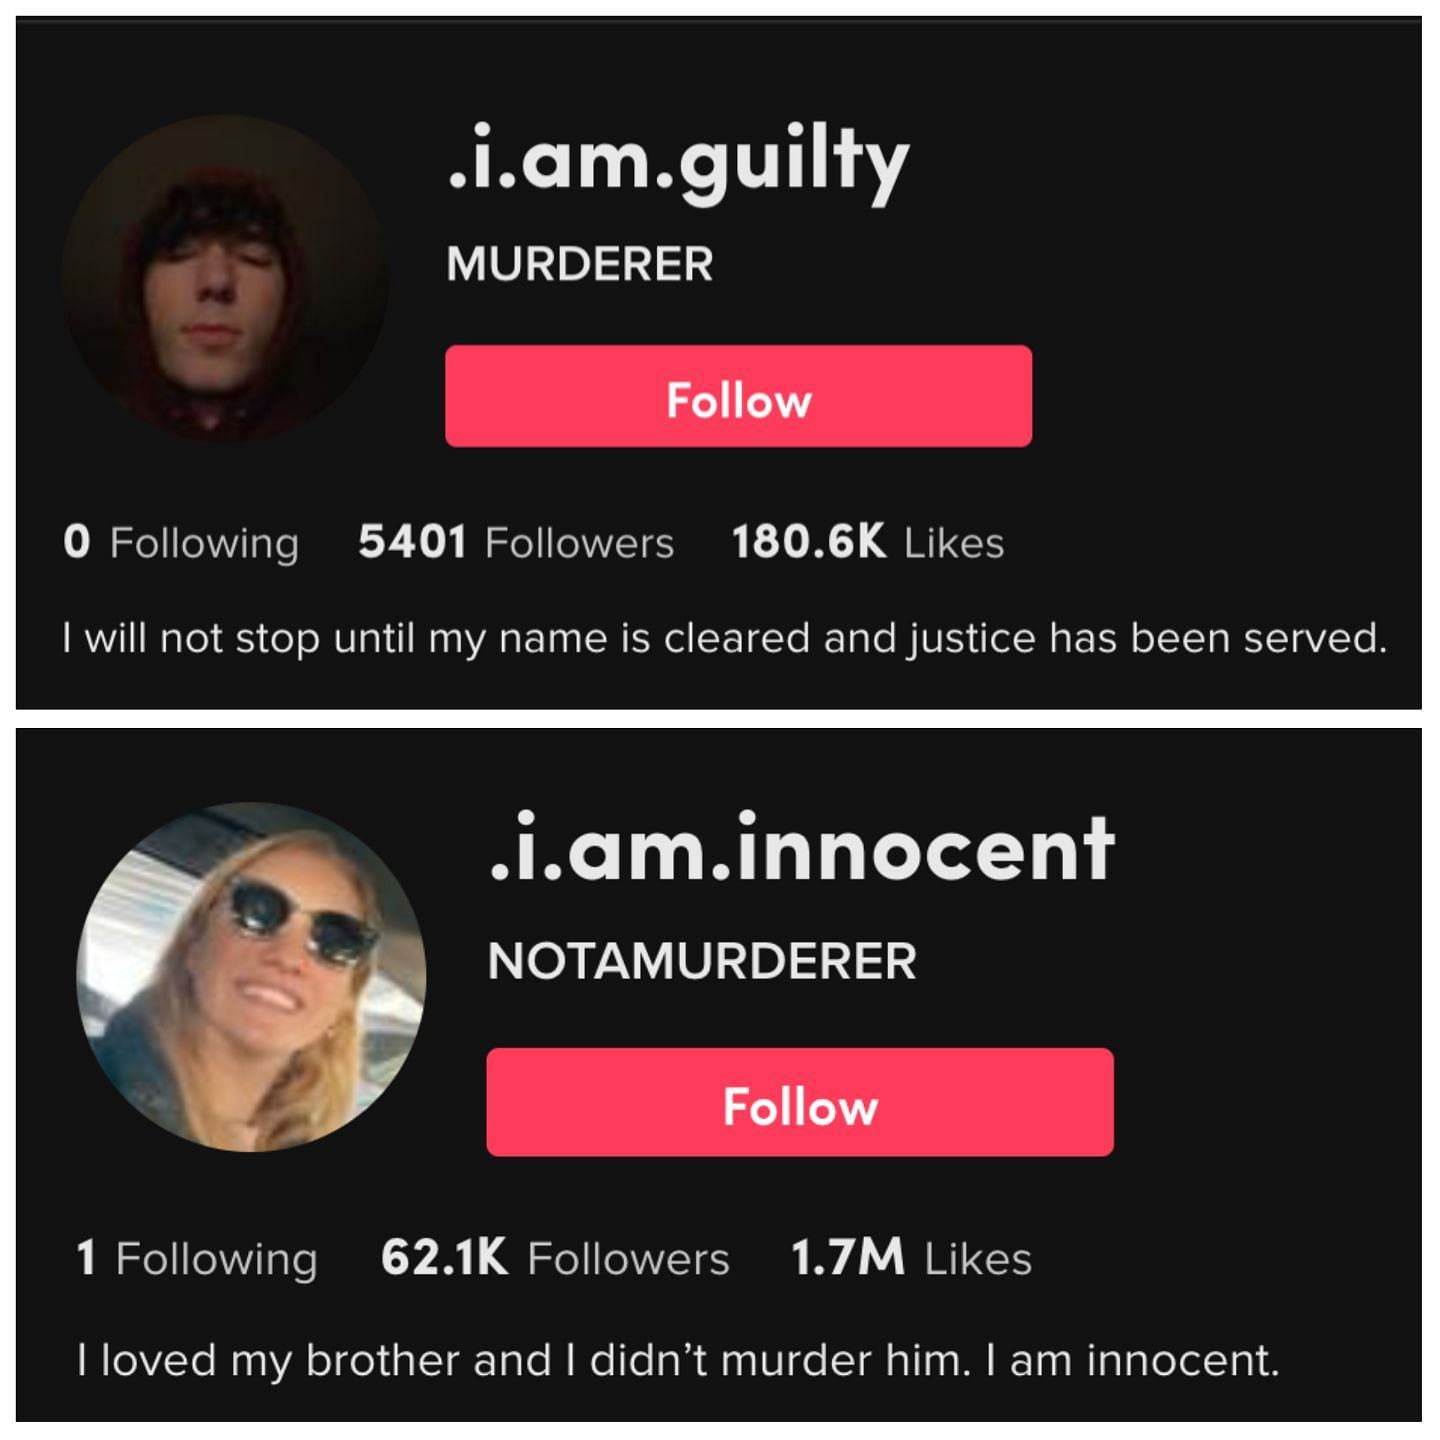 The TikTok bios of the two talk about being &quot;innocent.&quot; (Image via TikTok)